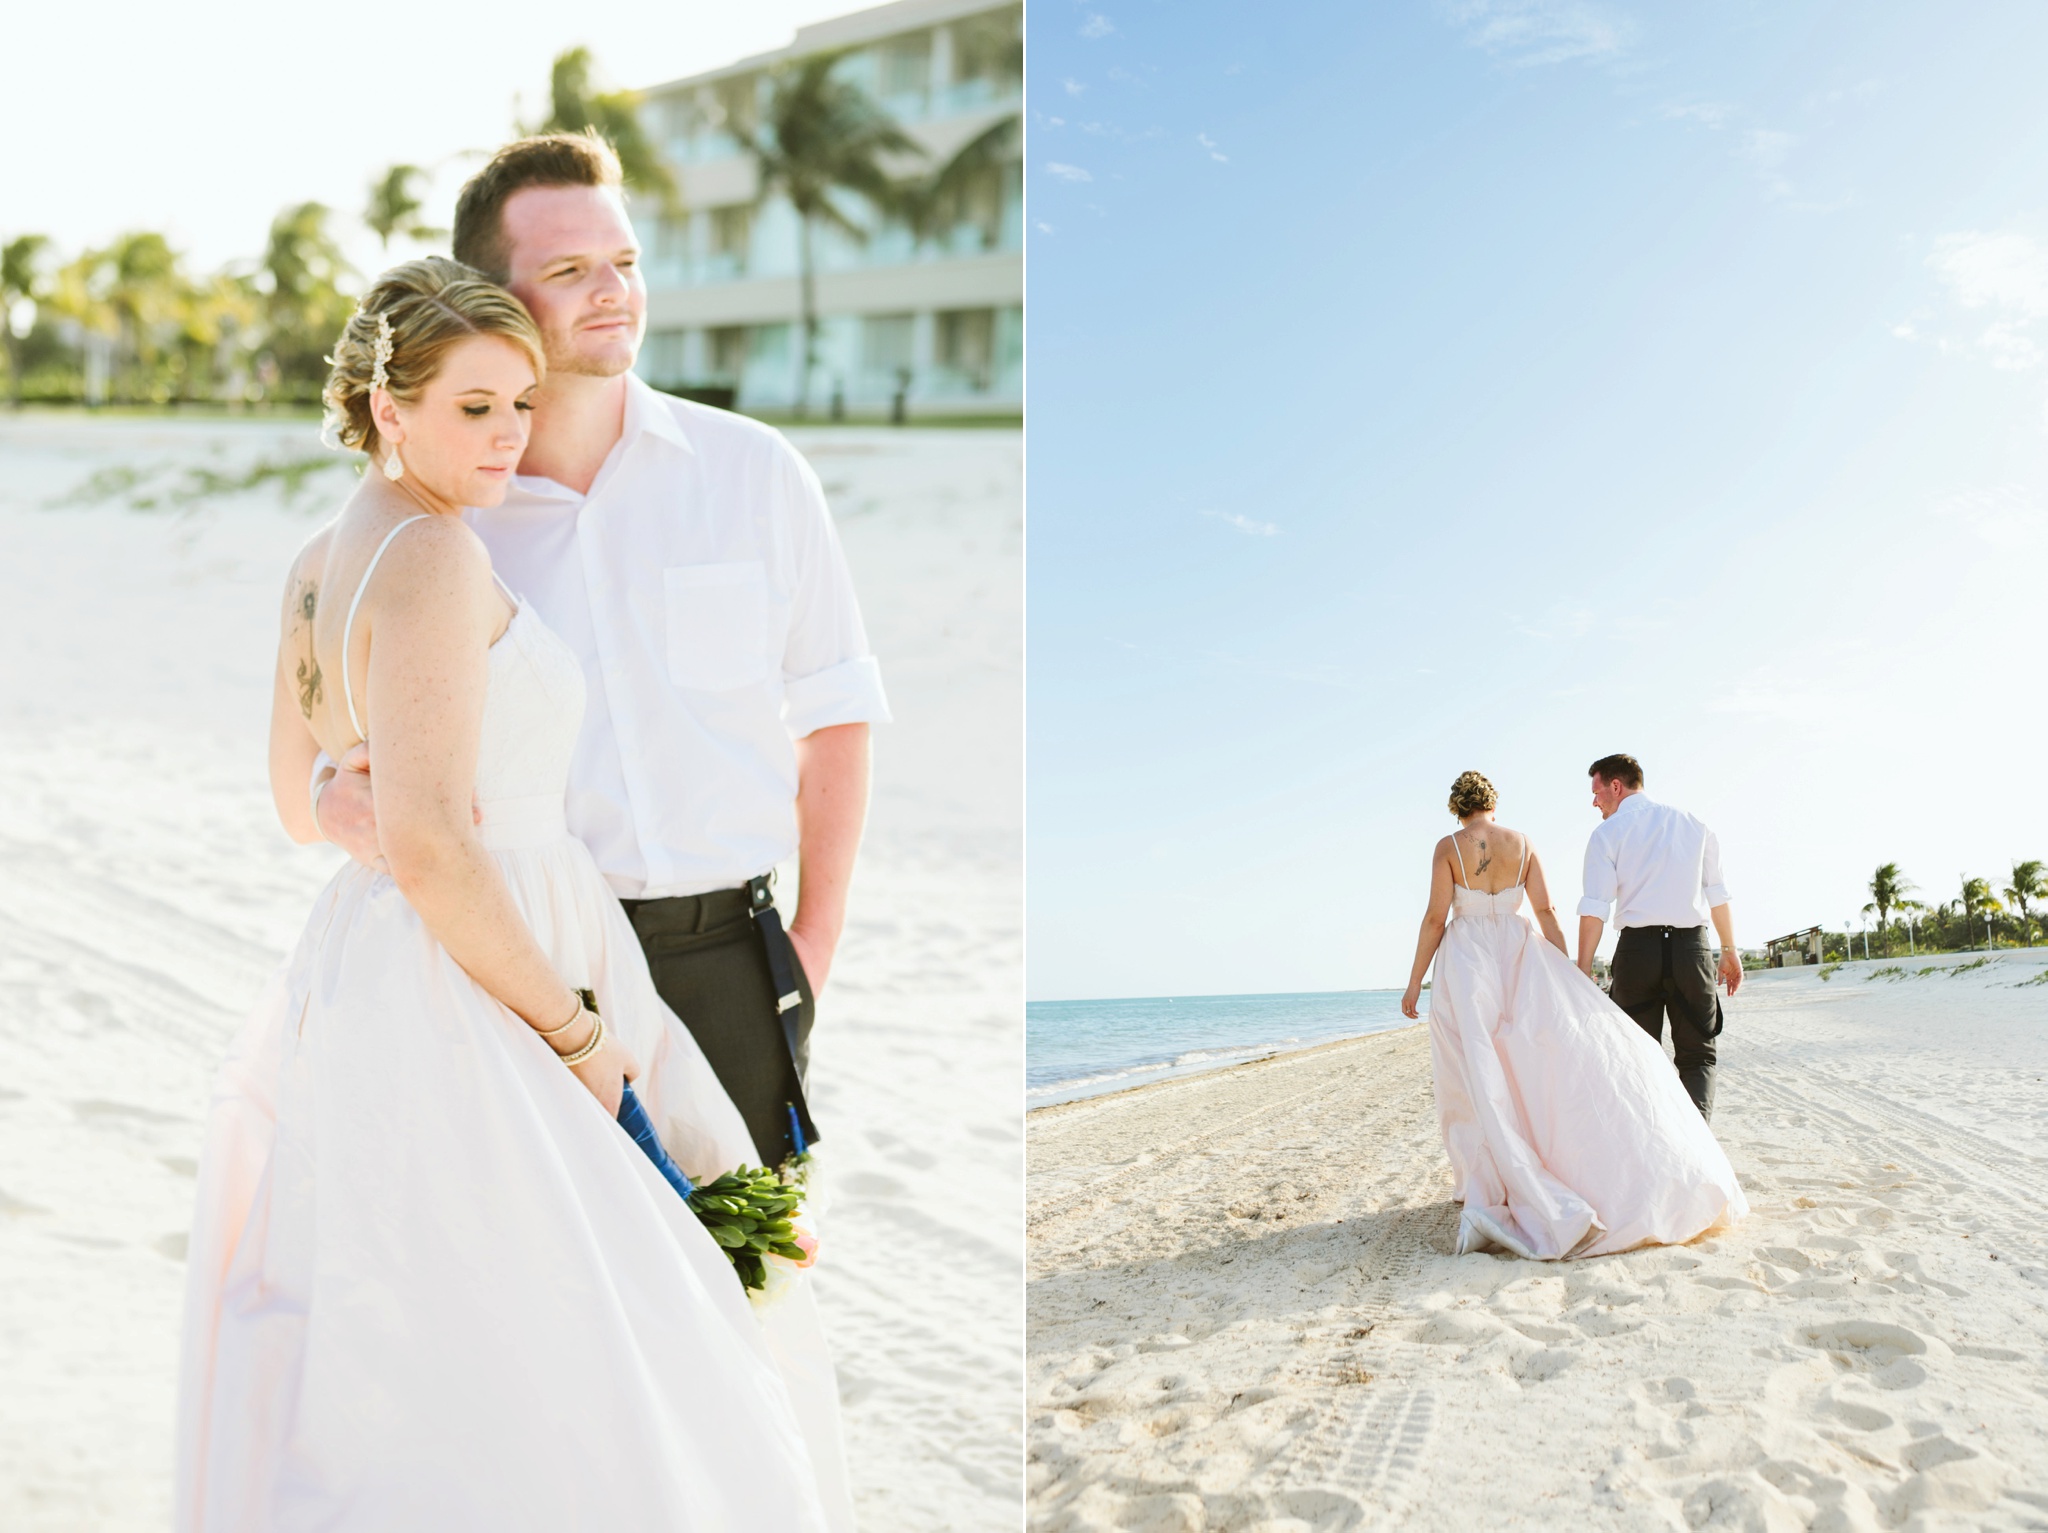 Moon Palace Resort Cancun Mexico Wedding Photos Bride and Groom Holding Hands Walking the Beach